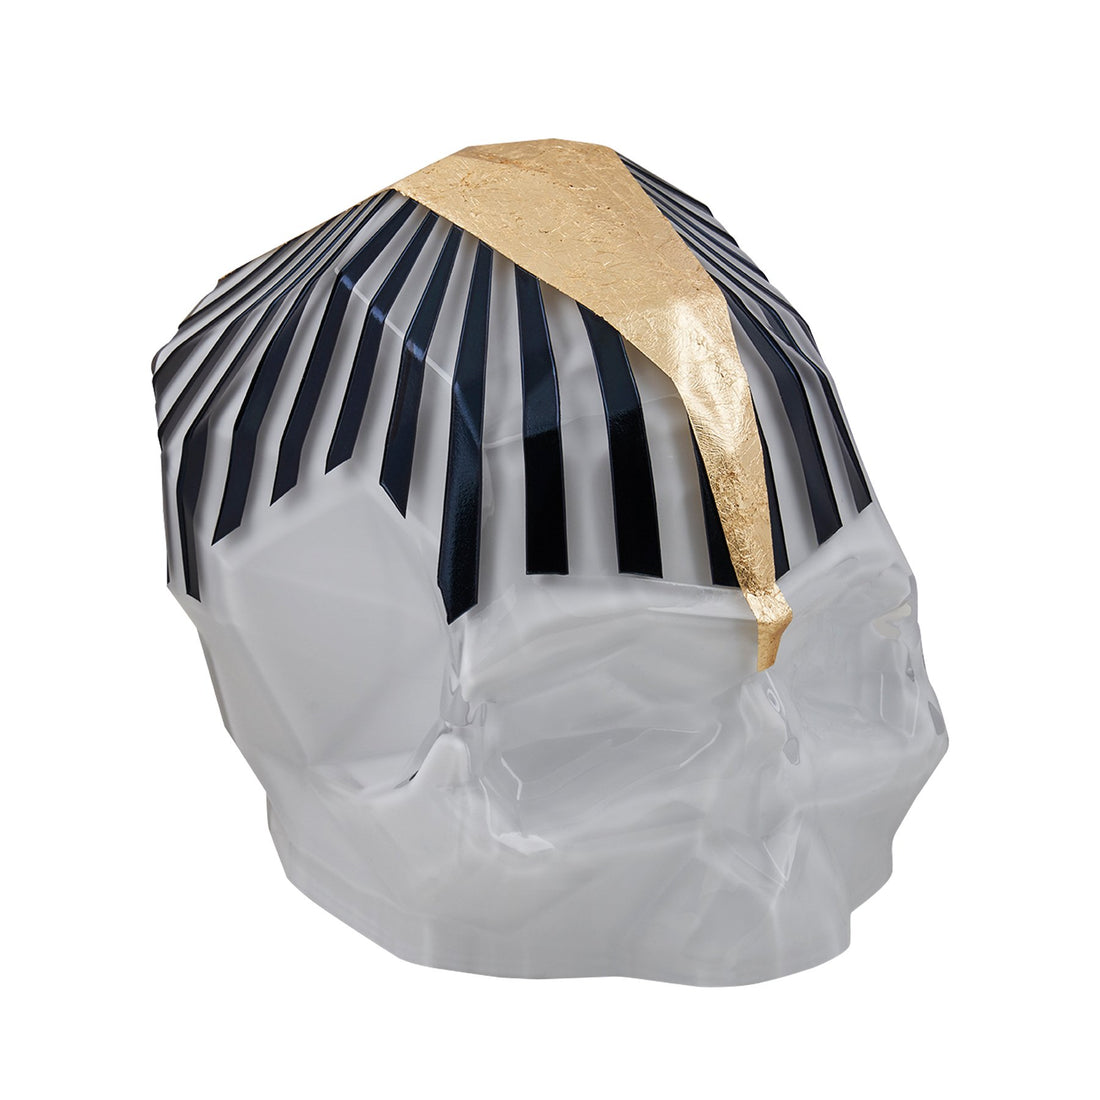 NUDE Rock and Pop Artist Collection Skull Large by Umut Karaman version 2 side view